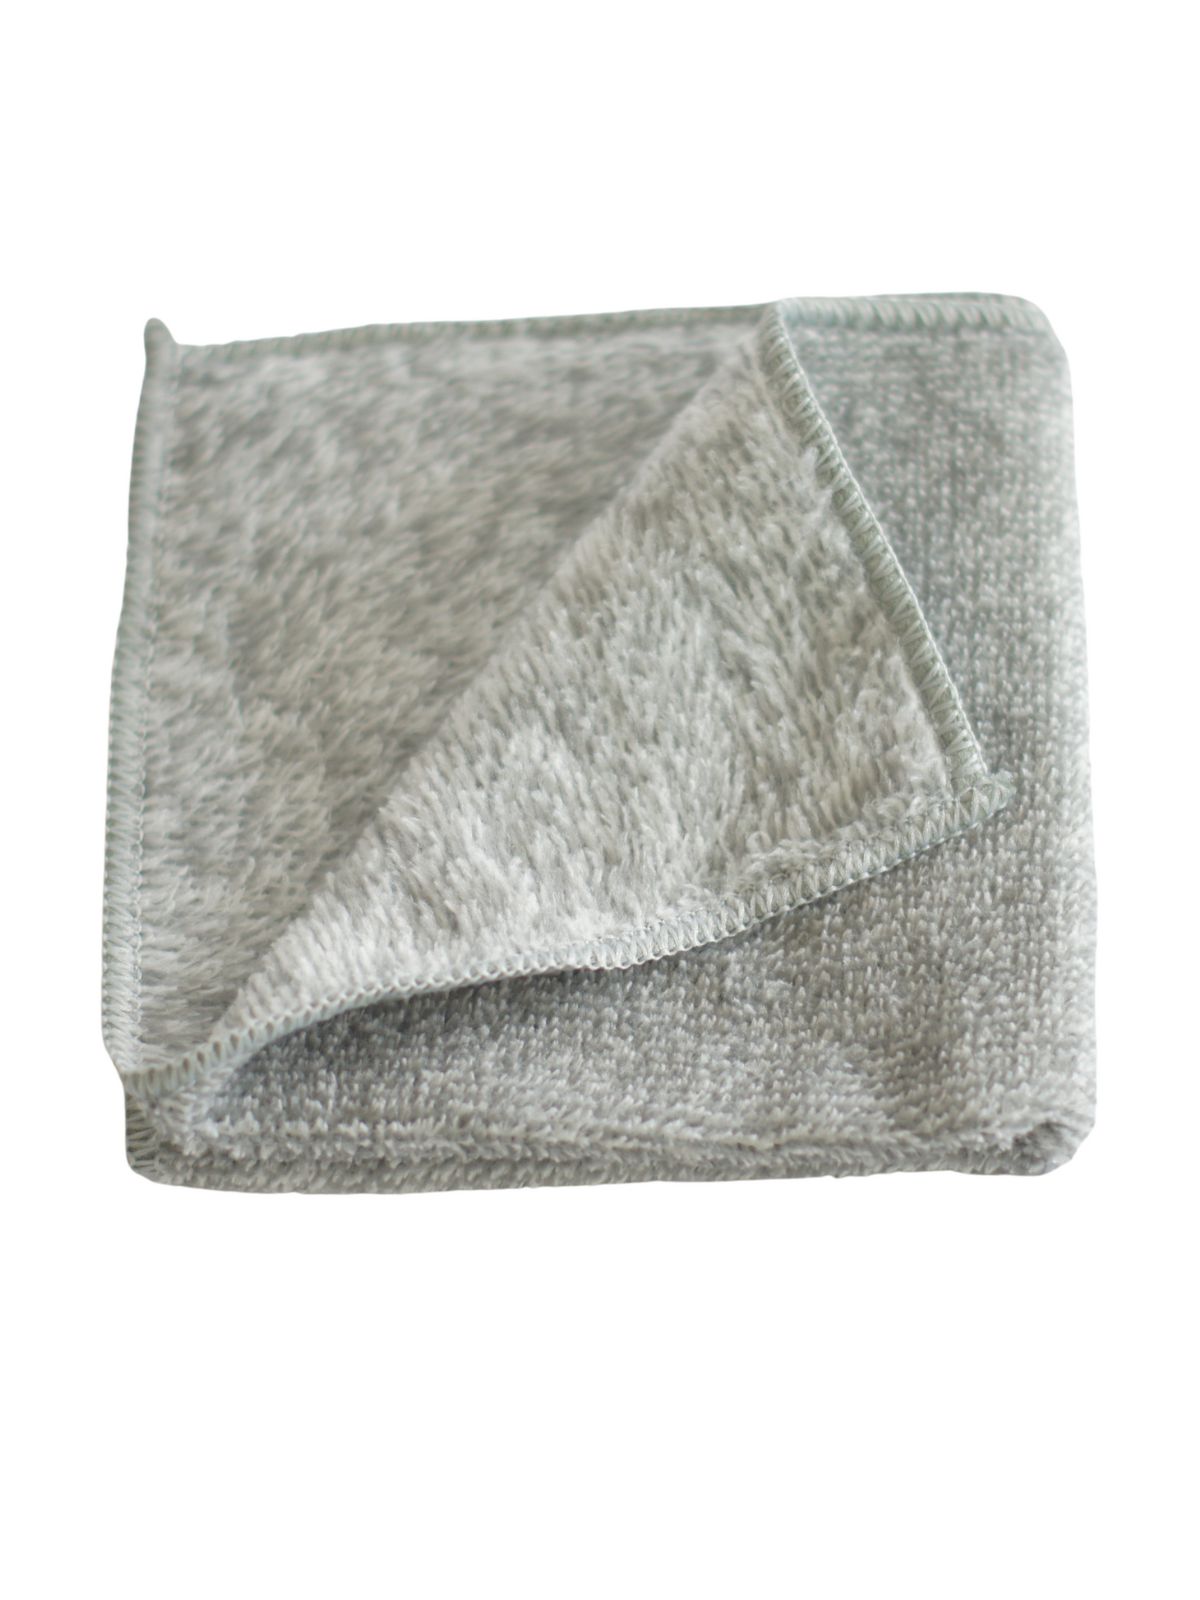 Microfiber cloth for the care and maintenance of jute ropes, grey, 28x28cm, lint-free